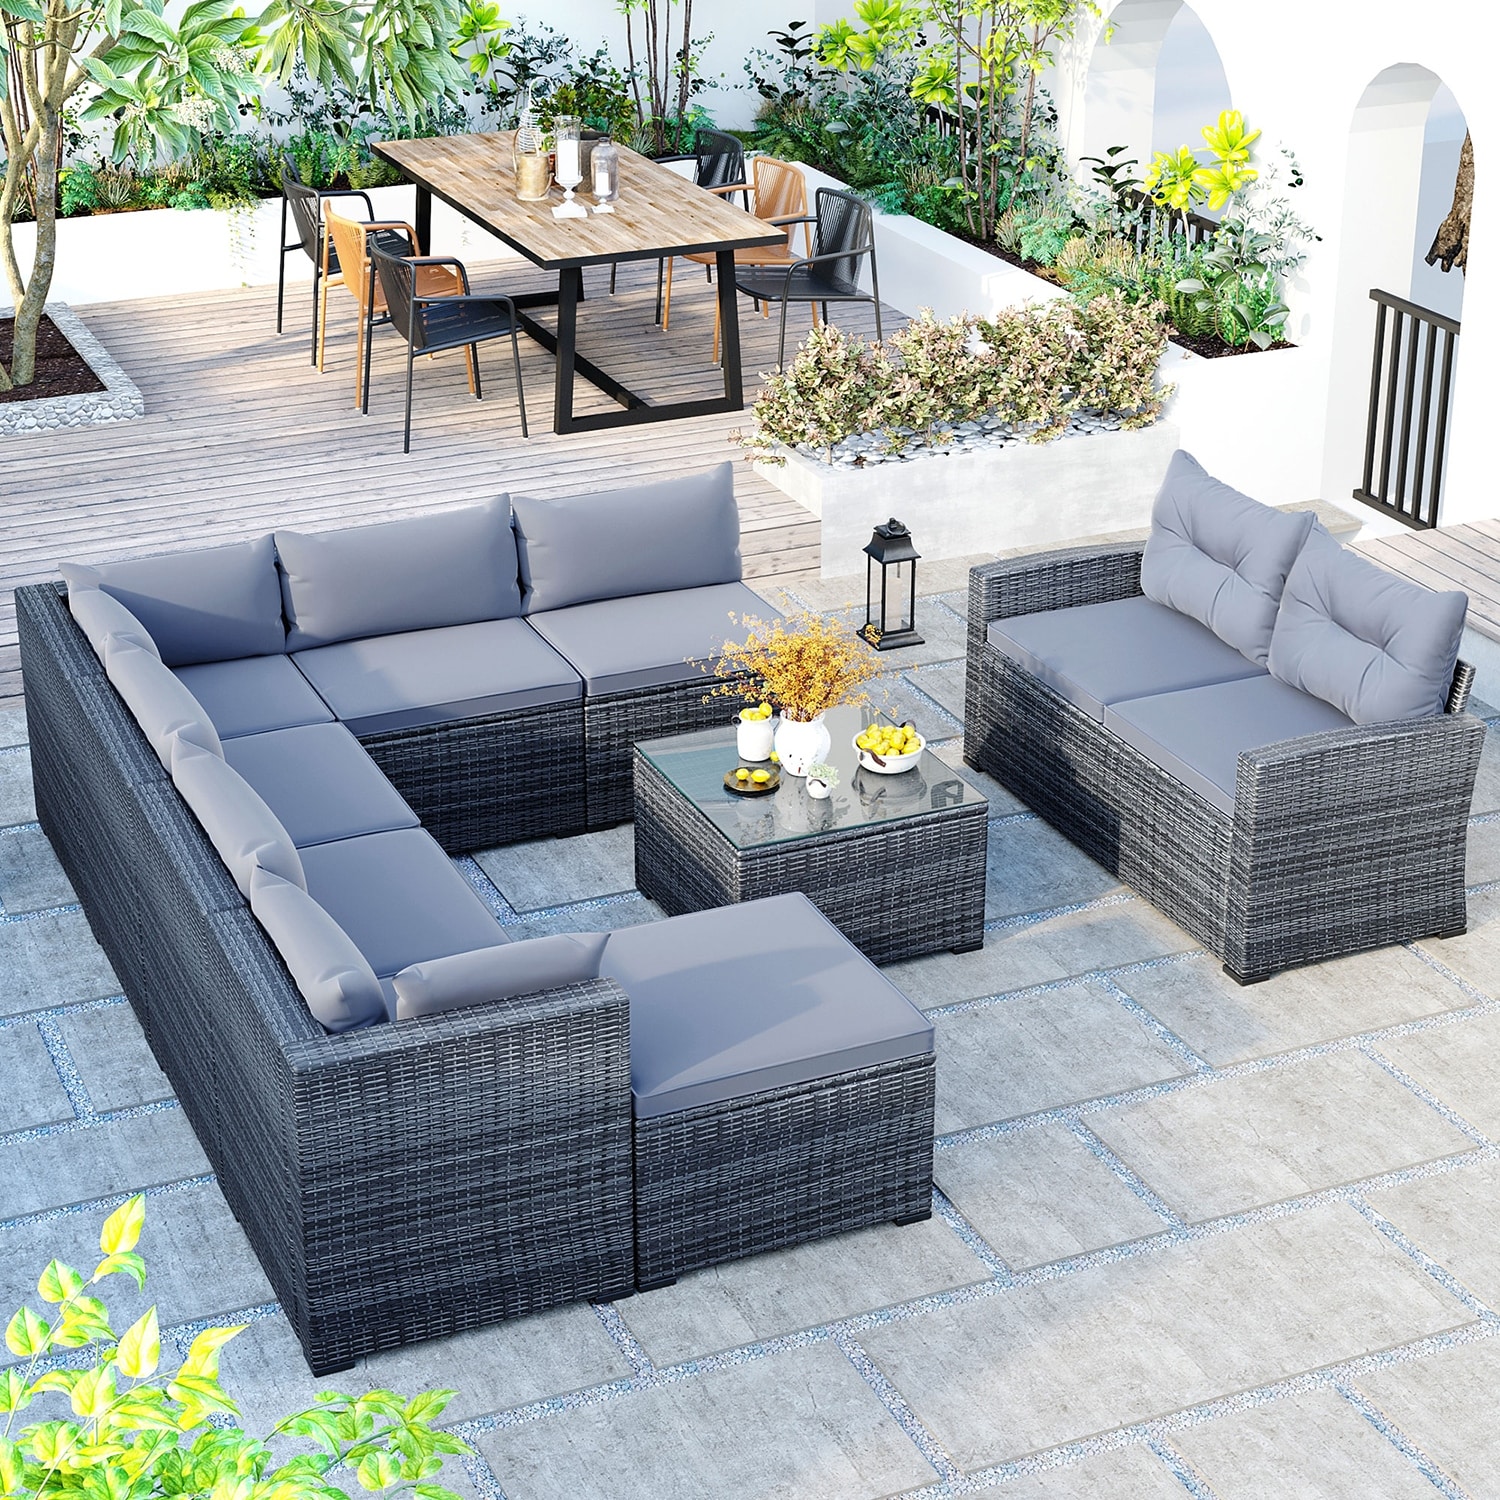 9 Piece Outdoor Patio Large Wicker Sofa Set With Removable Cushions